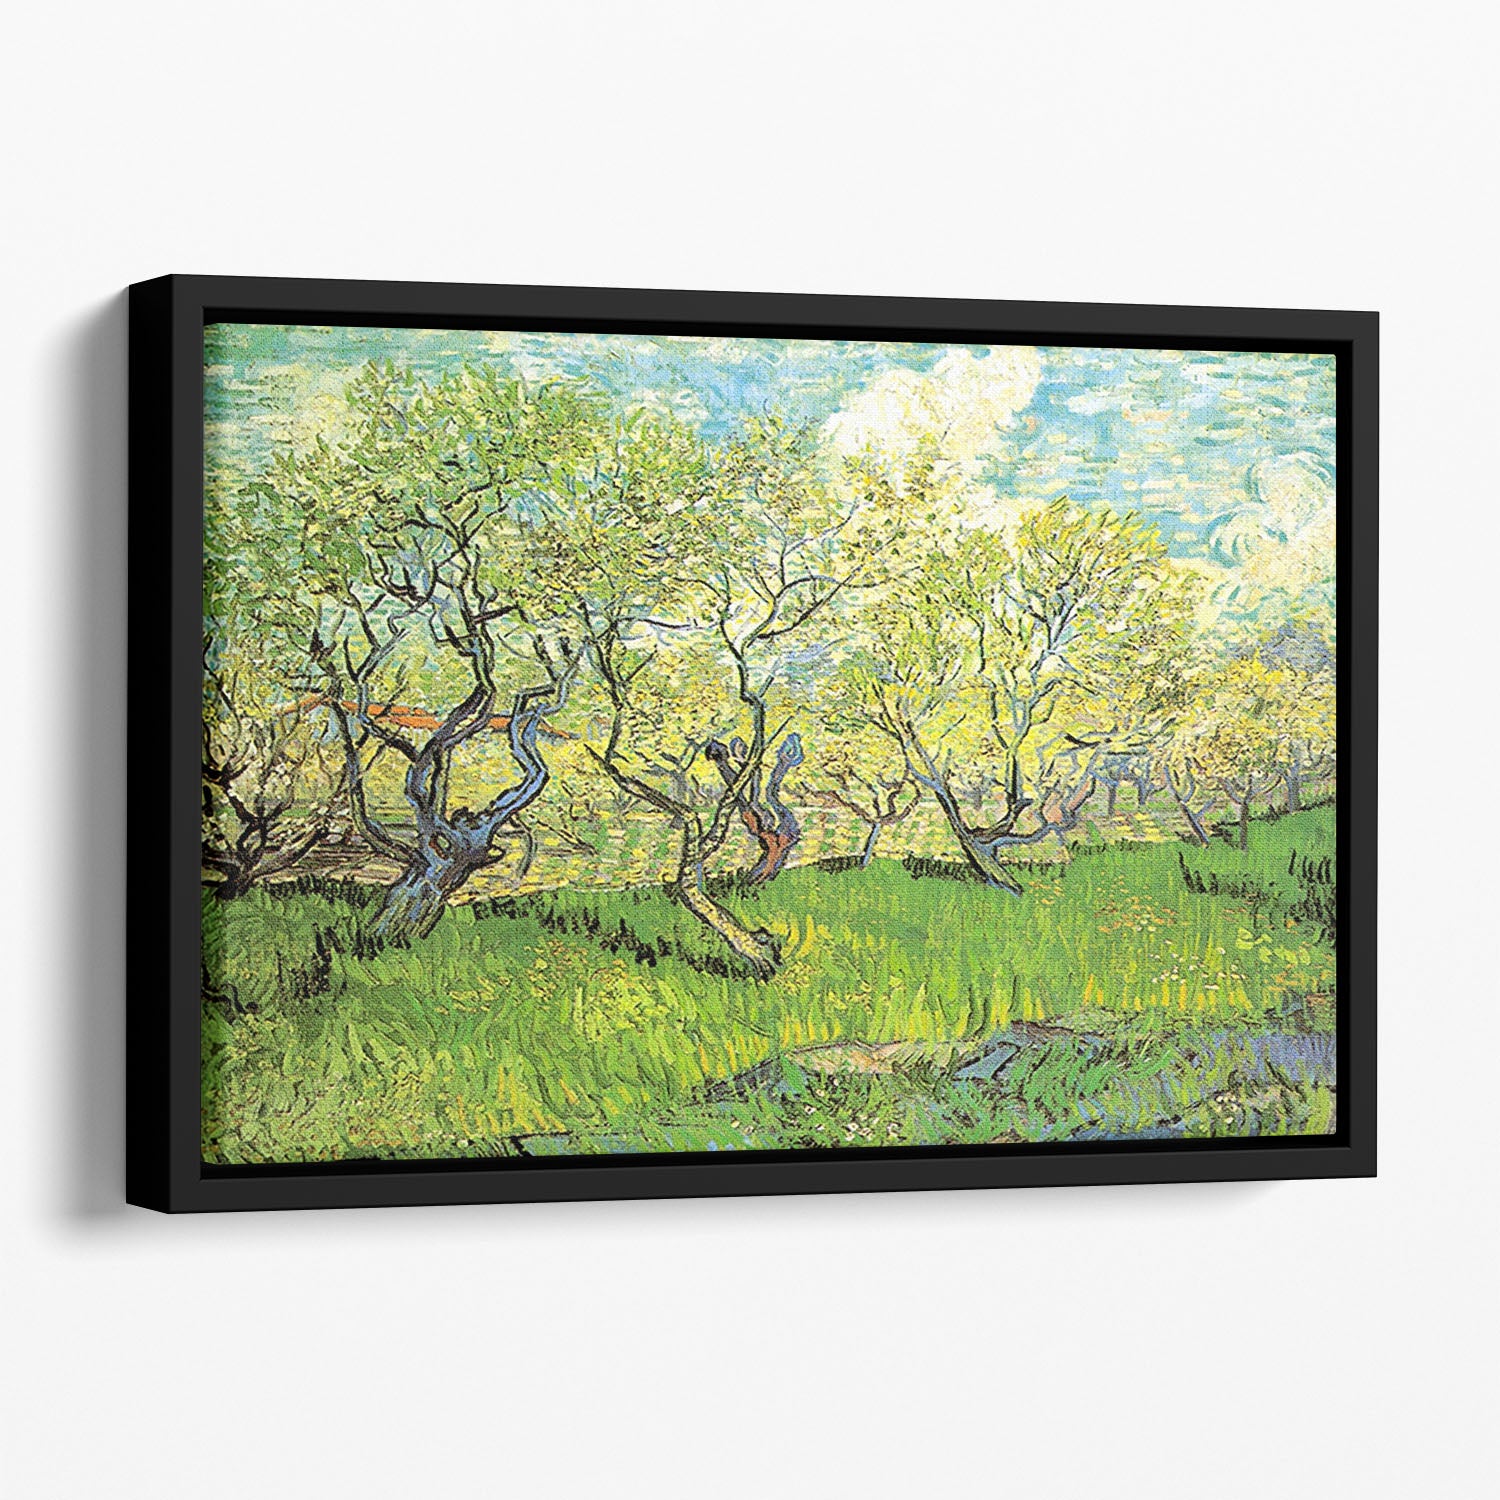 Orchard in Blossom 2 by Van Gogh Floating Framed Canvas